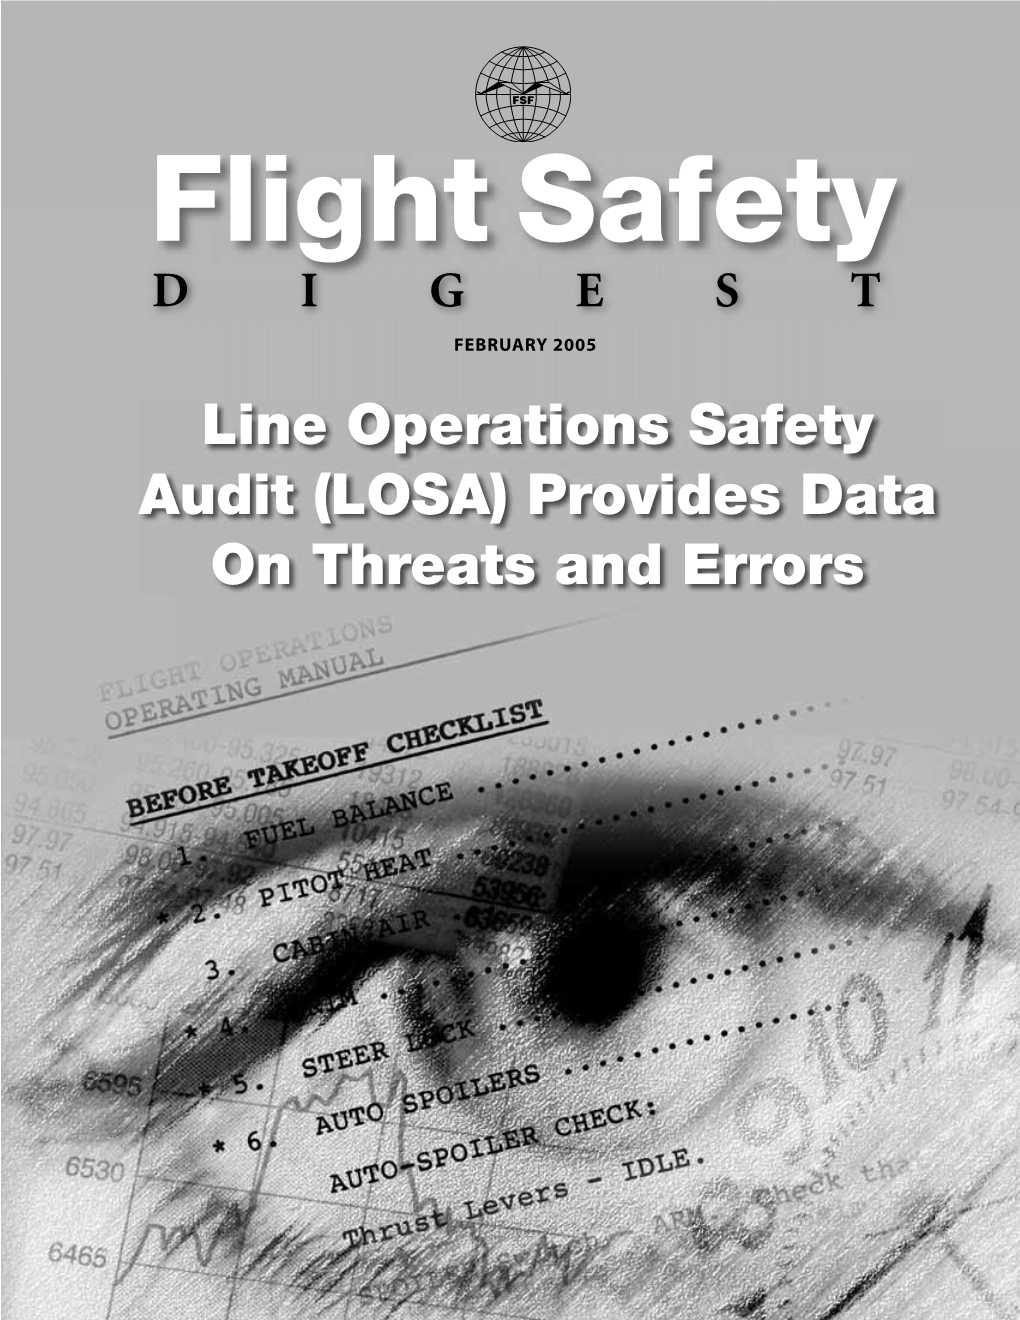 Line Operations Safety Audit (LOSA)